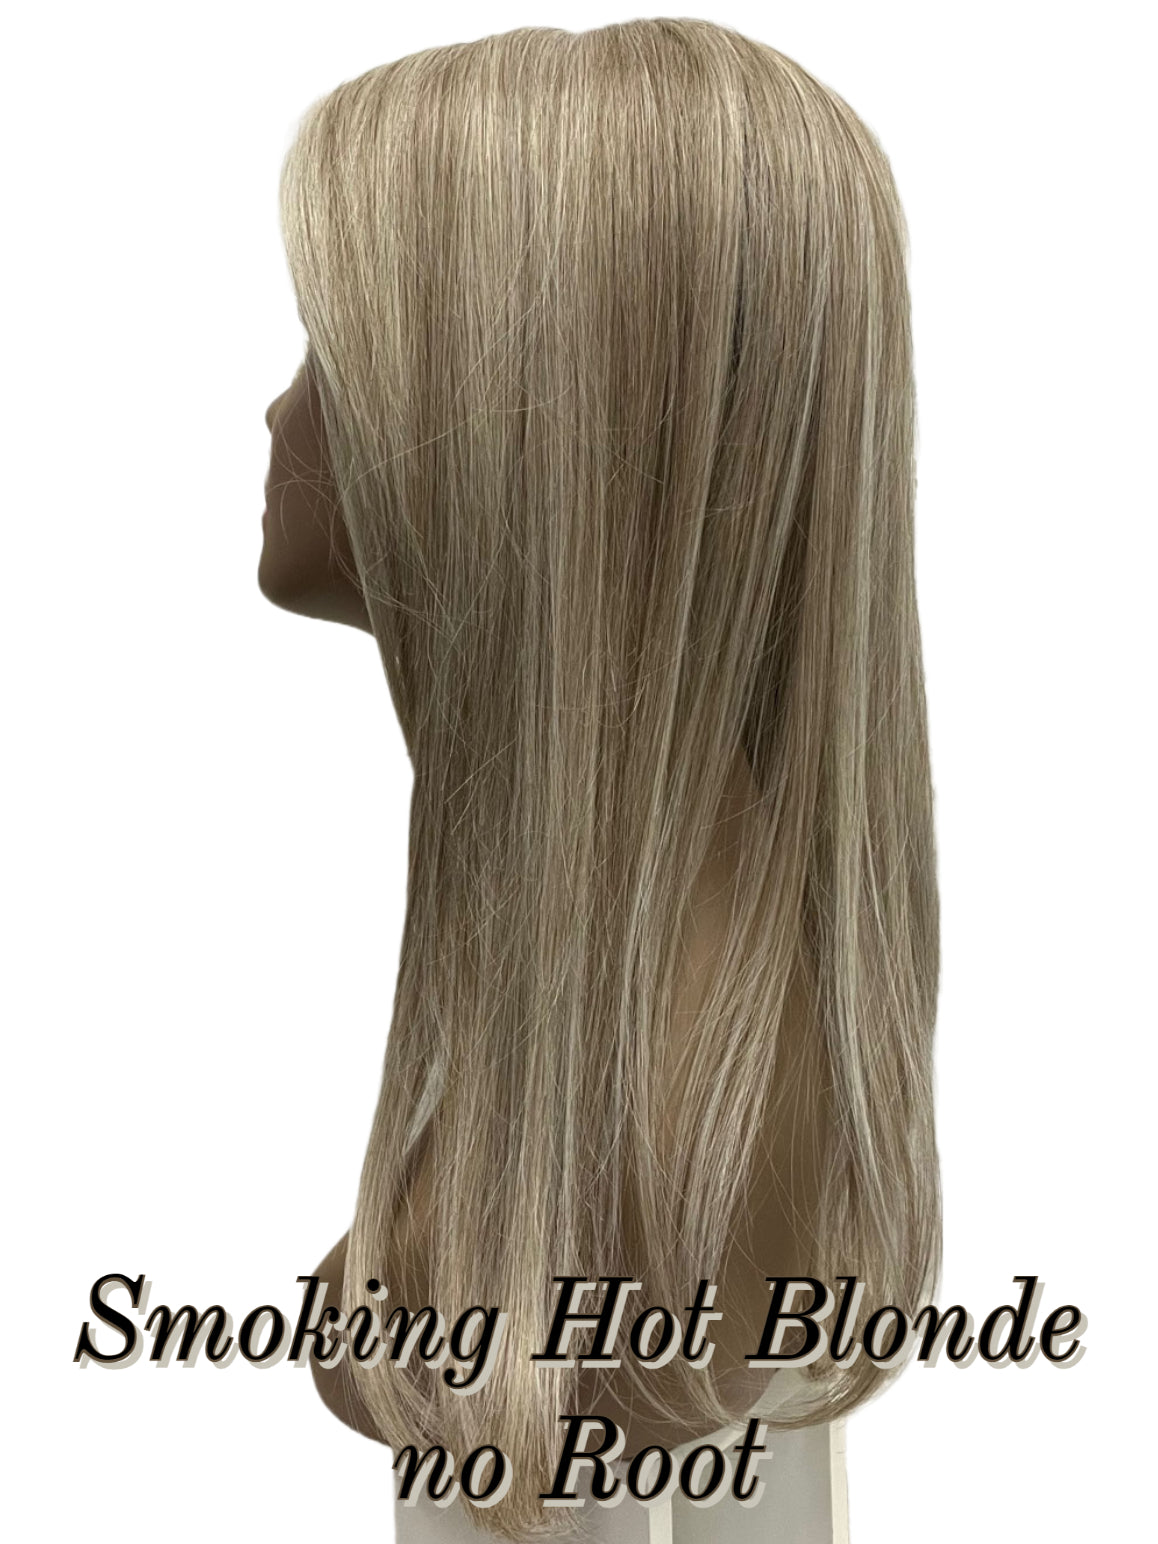 18 Inch Straight Topper LACE FRONT - 40% OFF THIS PRICE NO CODE NEEDED - FINAL SALE